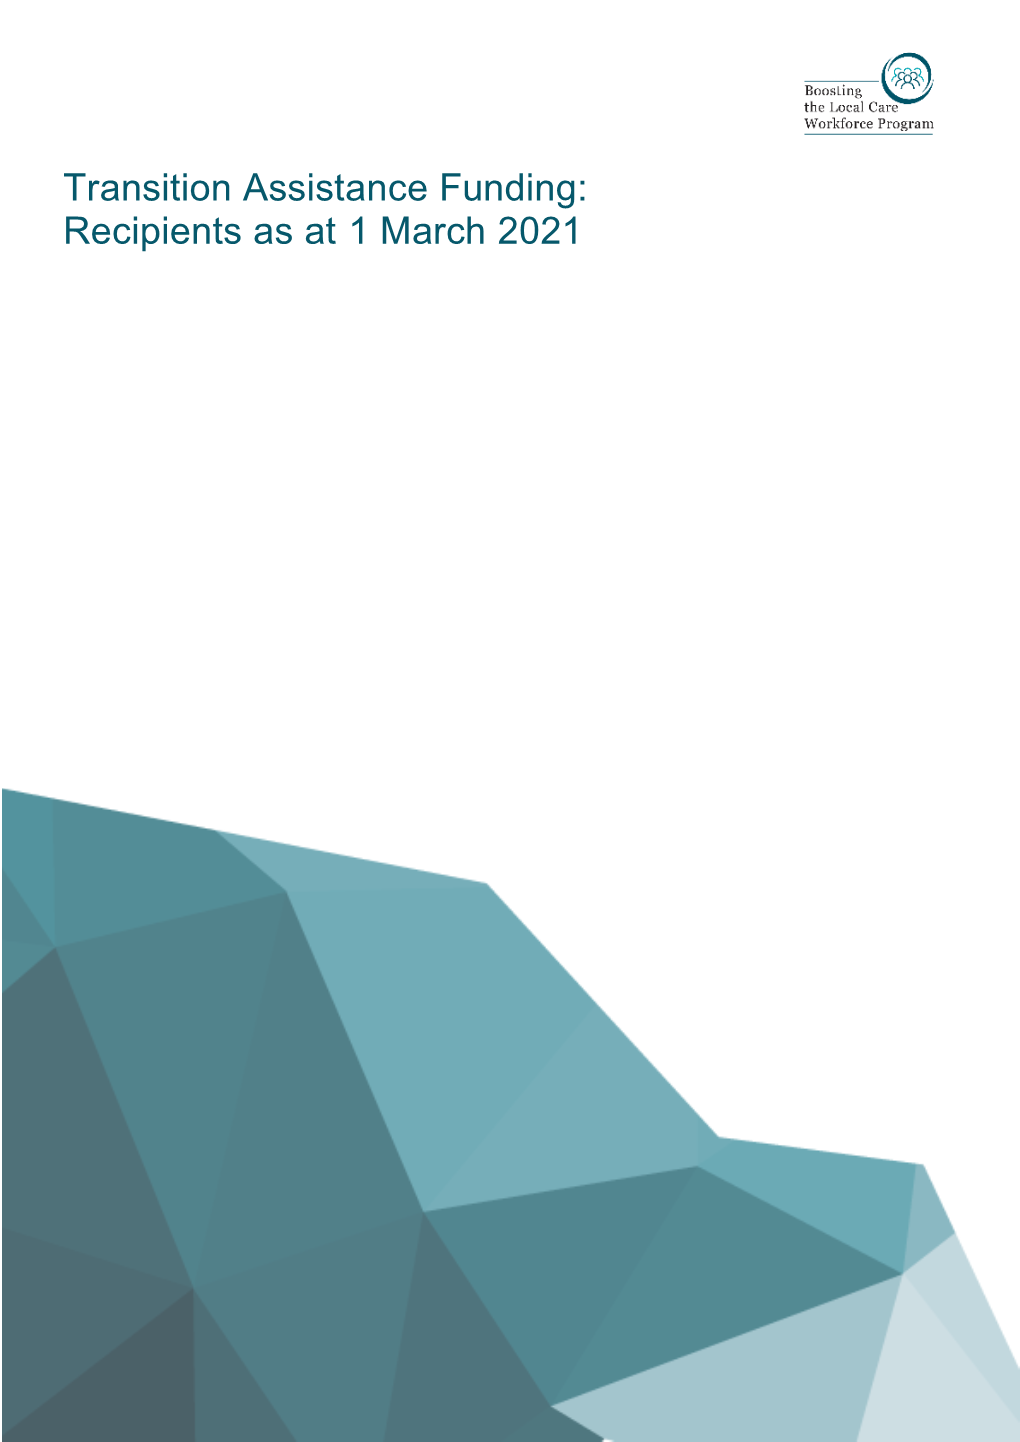 Transition Assistance Funding: Recipients As at 1 March 2021